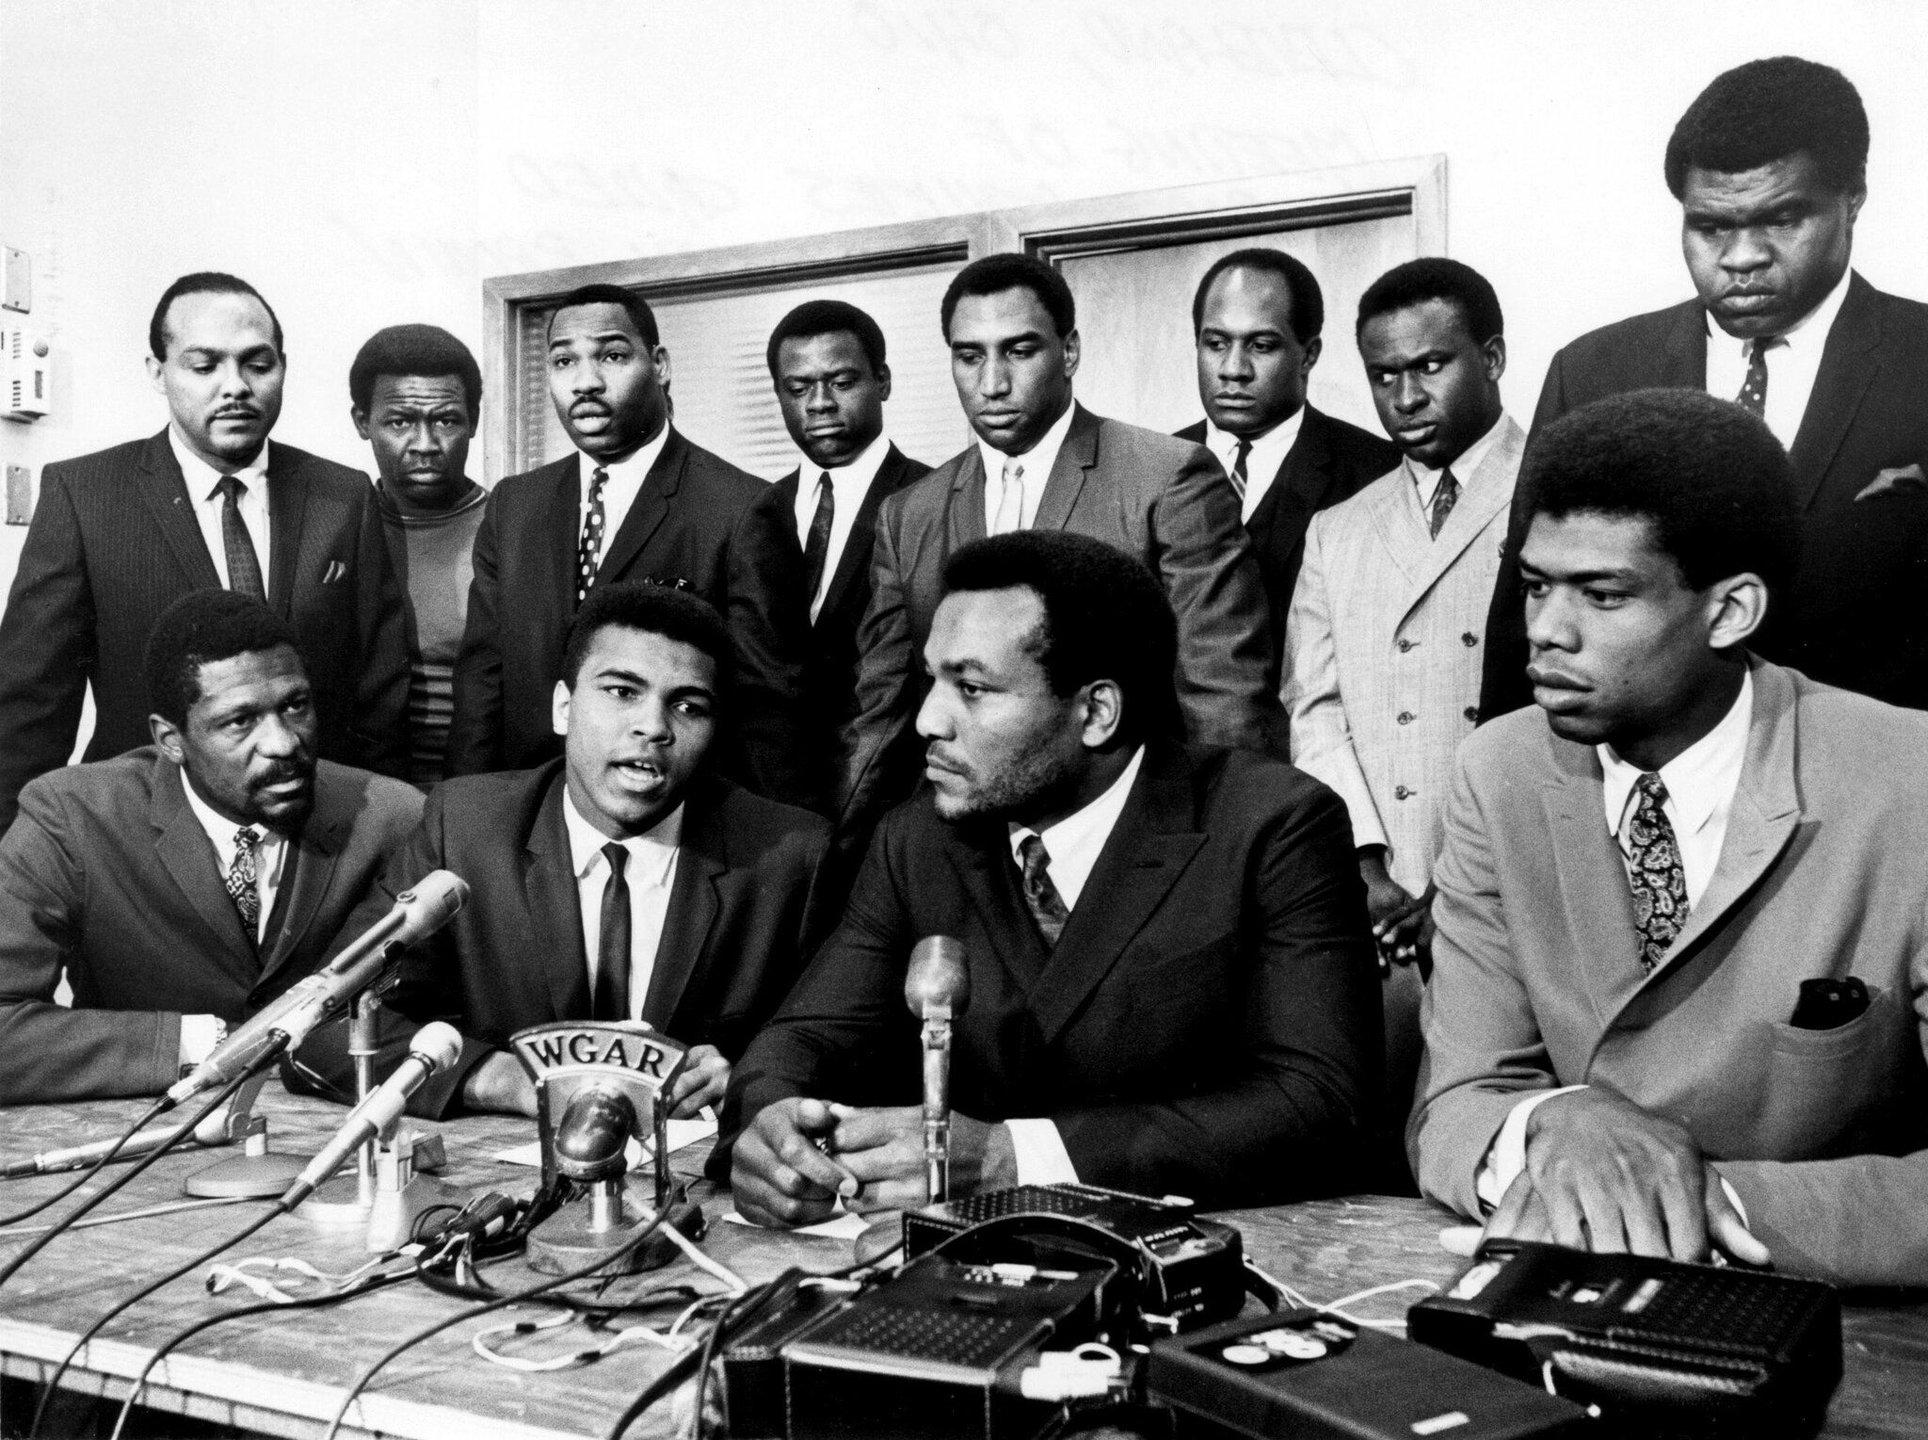 Seated third from the left, Jim Brown brought Bill Russell, Muhammad Ali, Kareem Abdul-Jabbar, and other black athletes together to help support Ali's stances on the Vietnam war. Photo by Tony Tomsic, Associated Press.